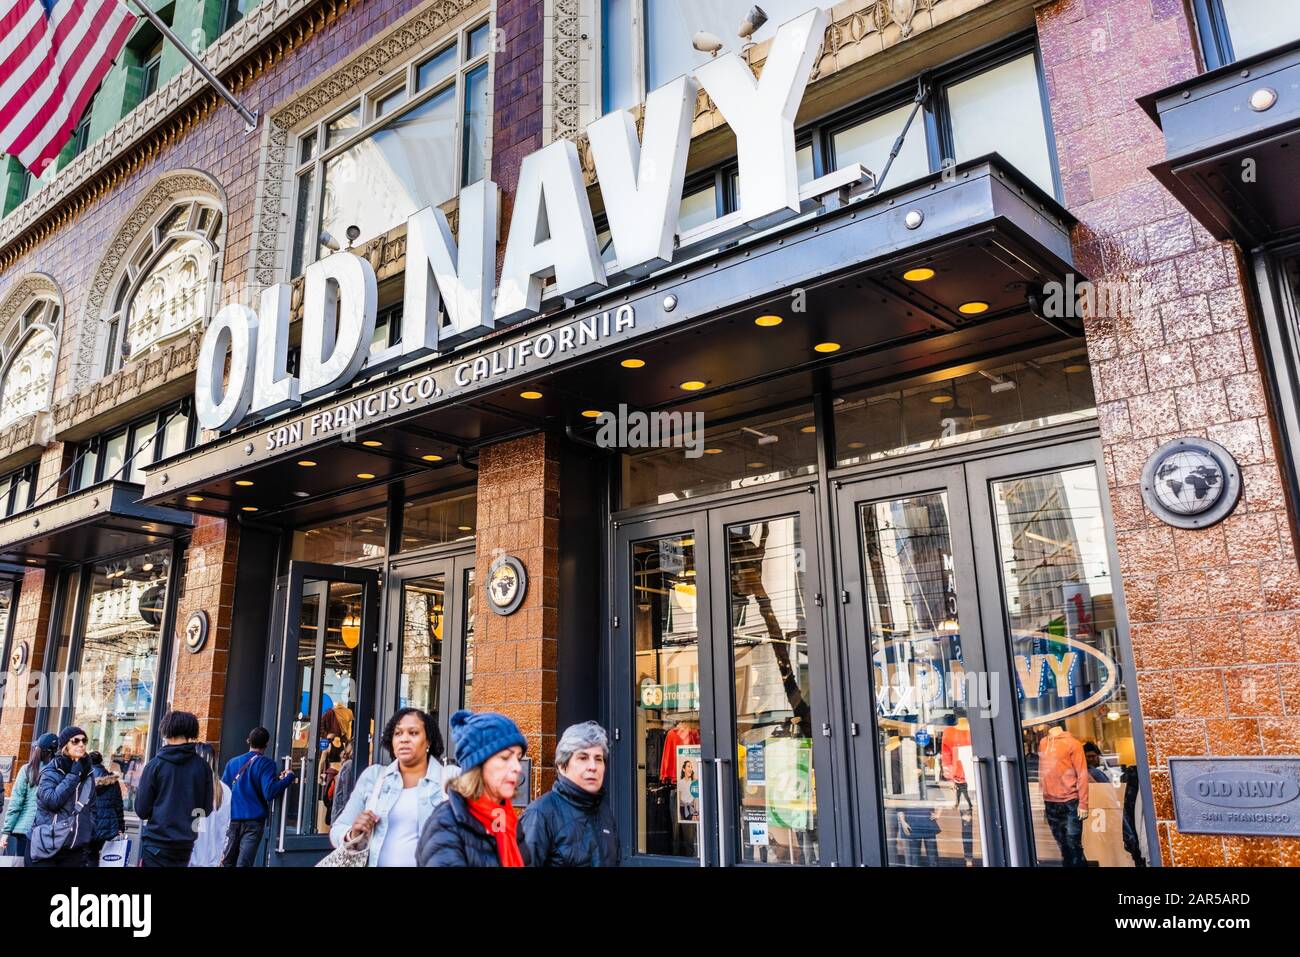 Jan 18, 2020 San Francisco / CA / USA - Old Navy store entrance on Market Street; Old Navy is an American clothing and accessories retailing company o Stock Photo